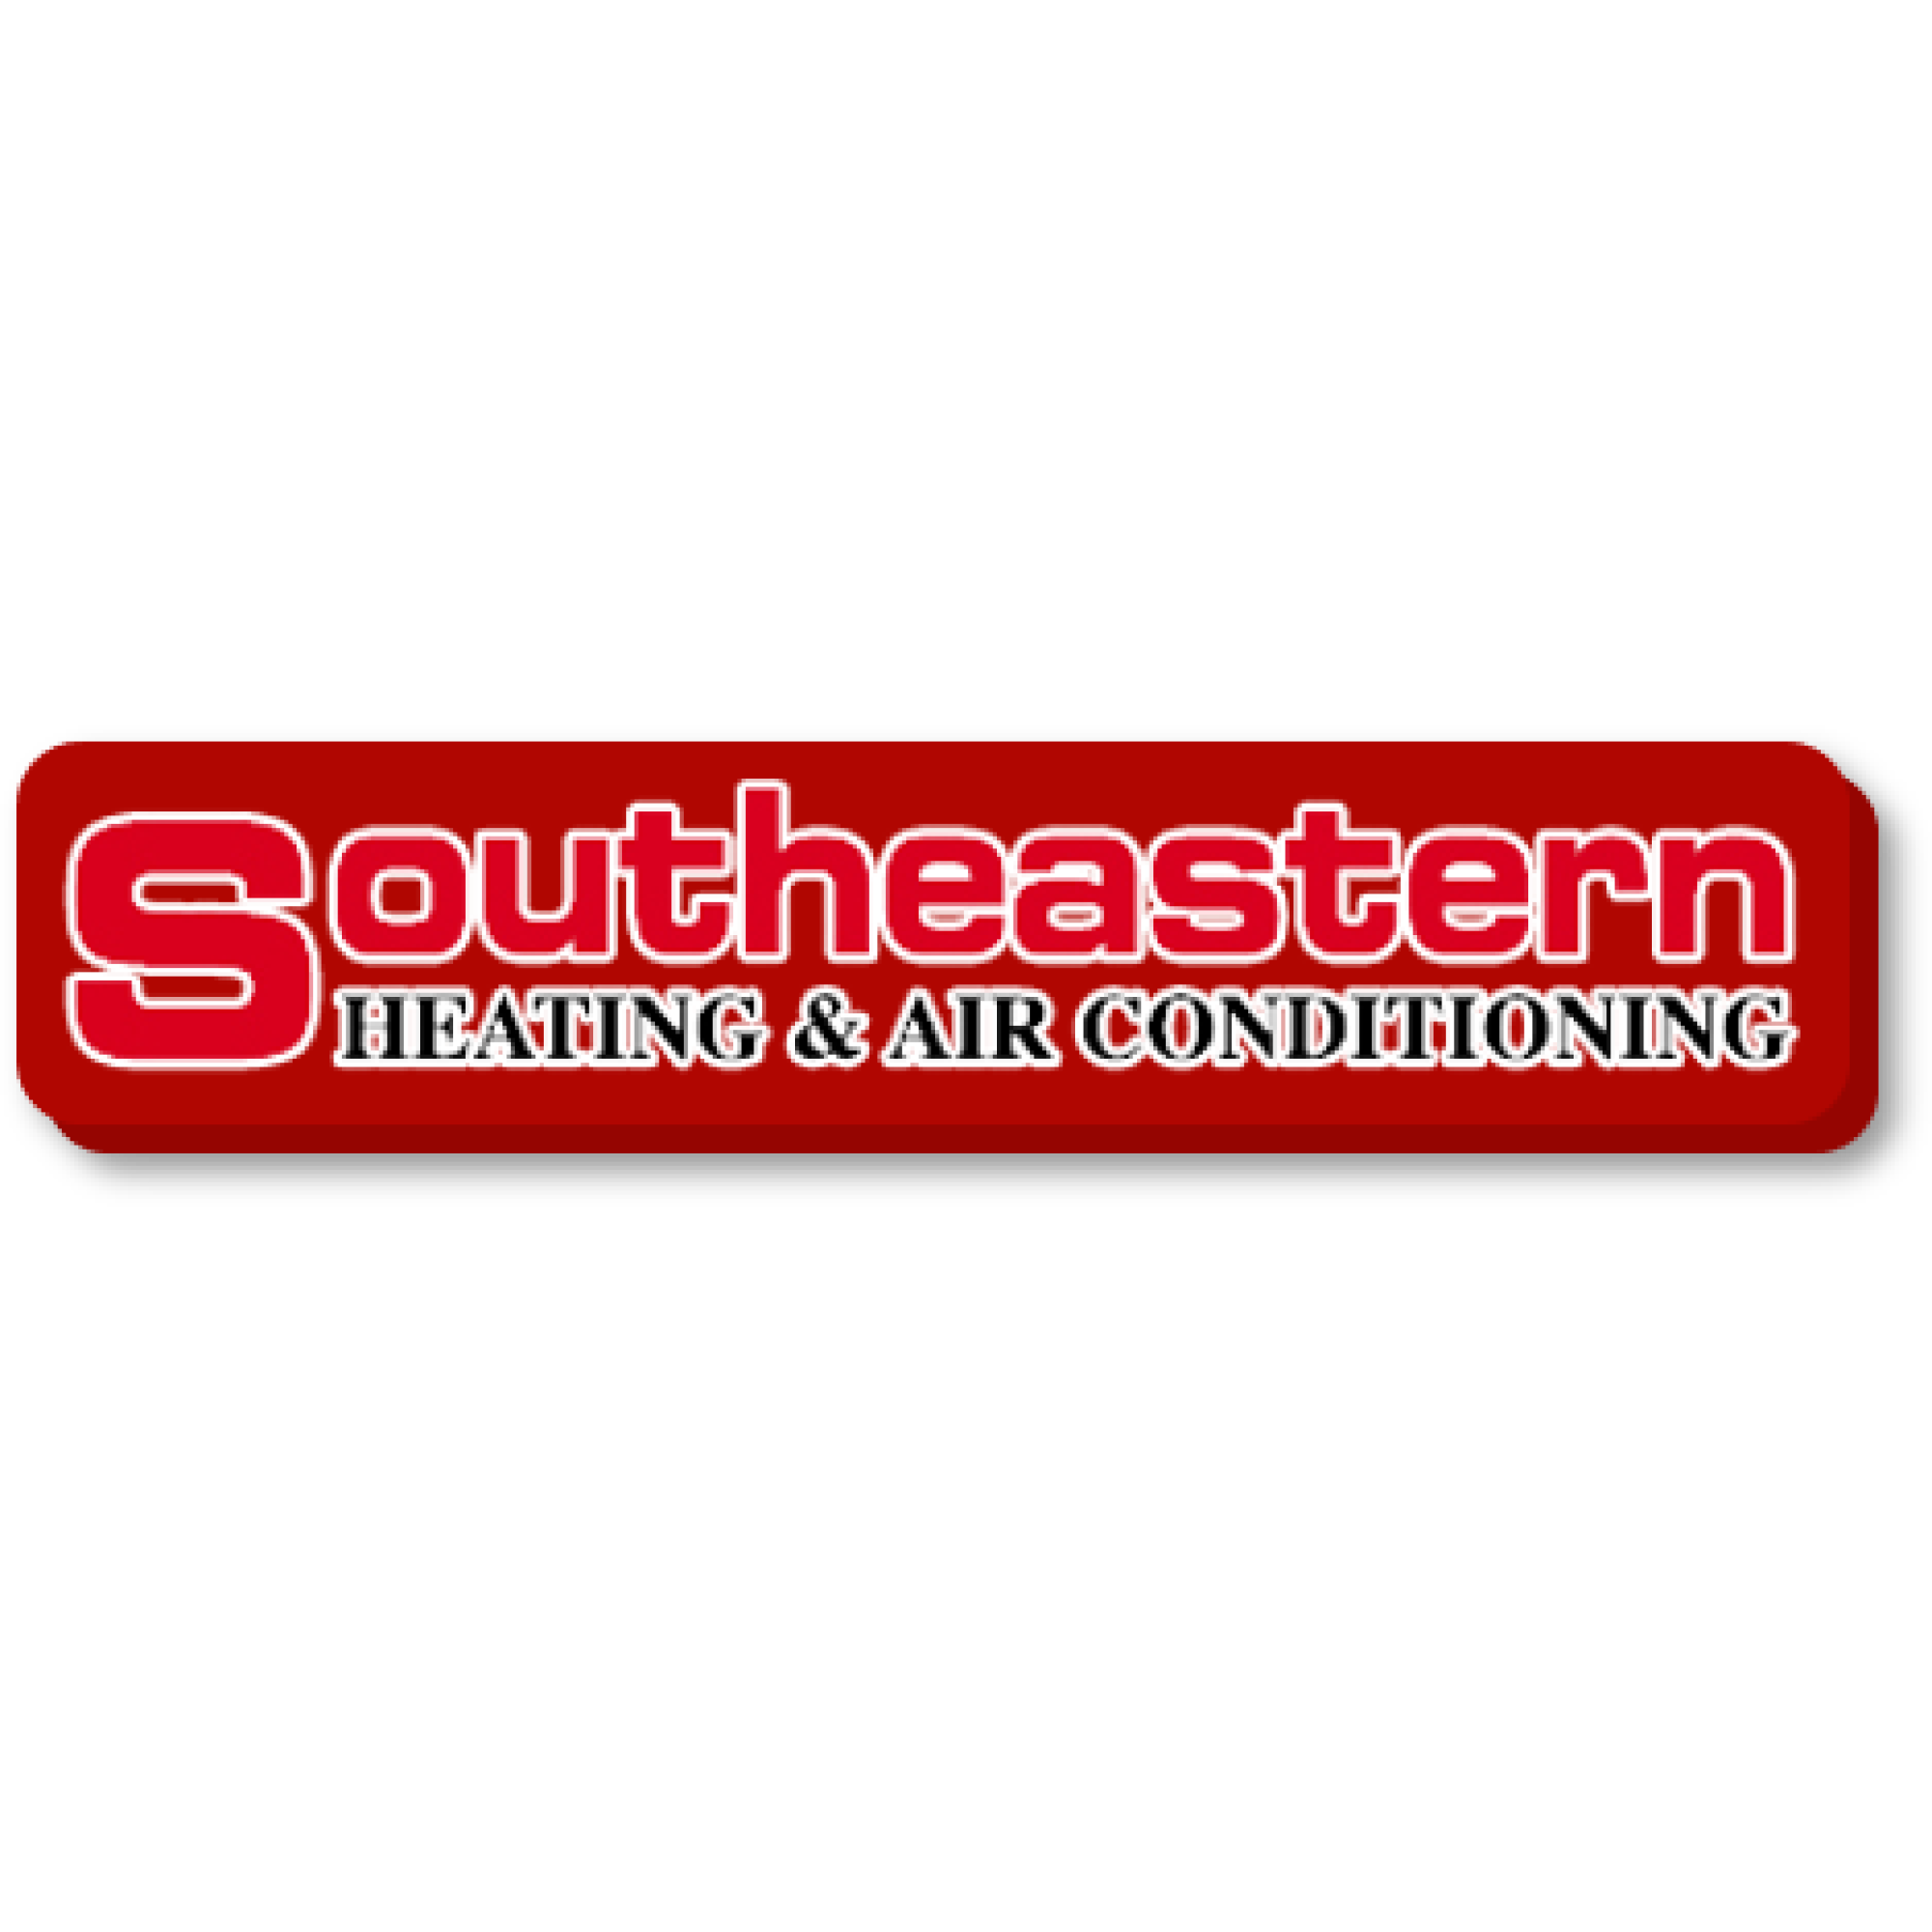 Southeastern Heating Air Conditioning & Electrical - Wilmington, NC 28403 - (910)799-1232 | ShowMeLocal.com